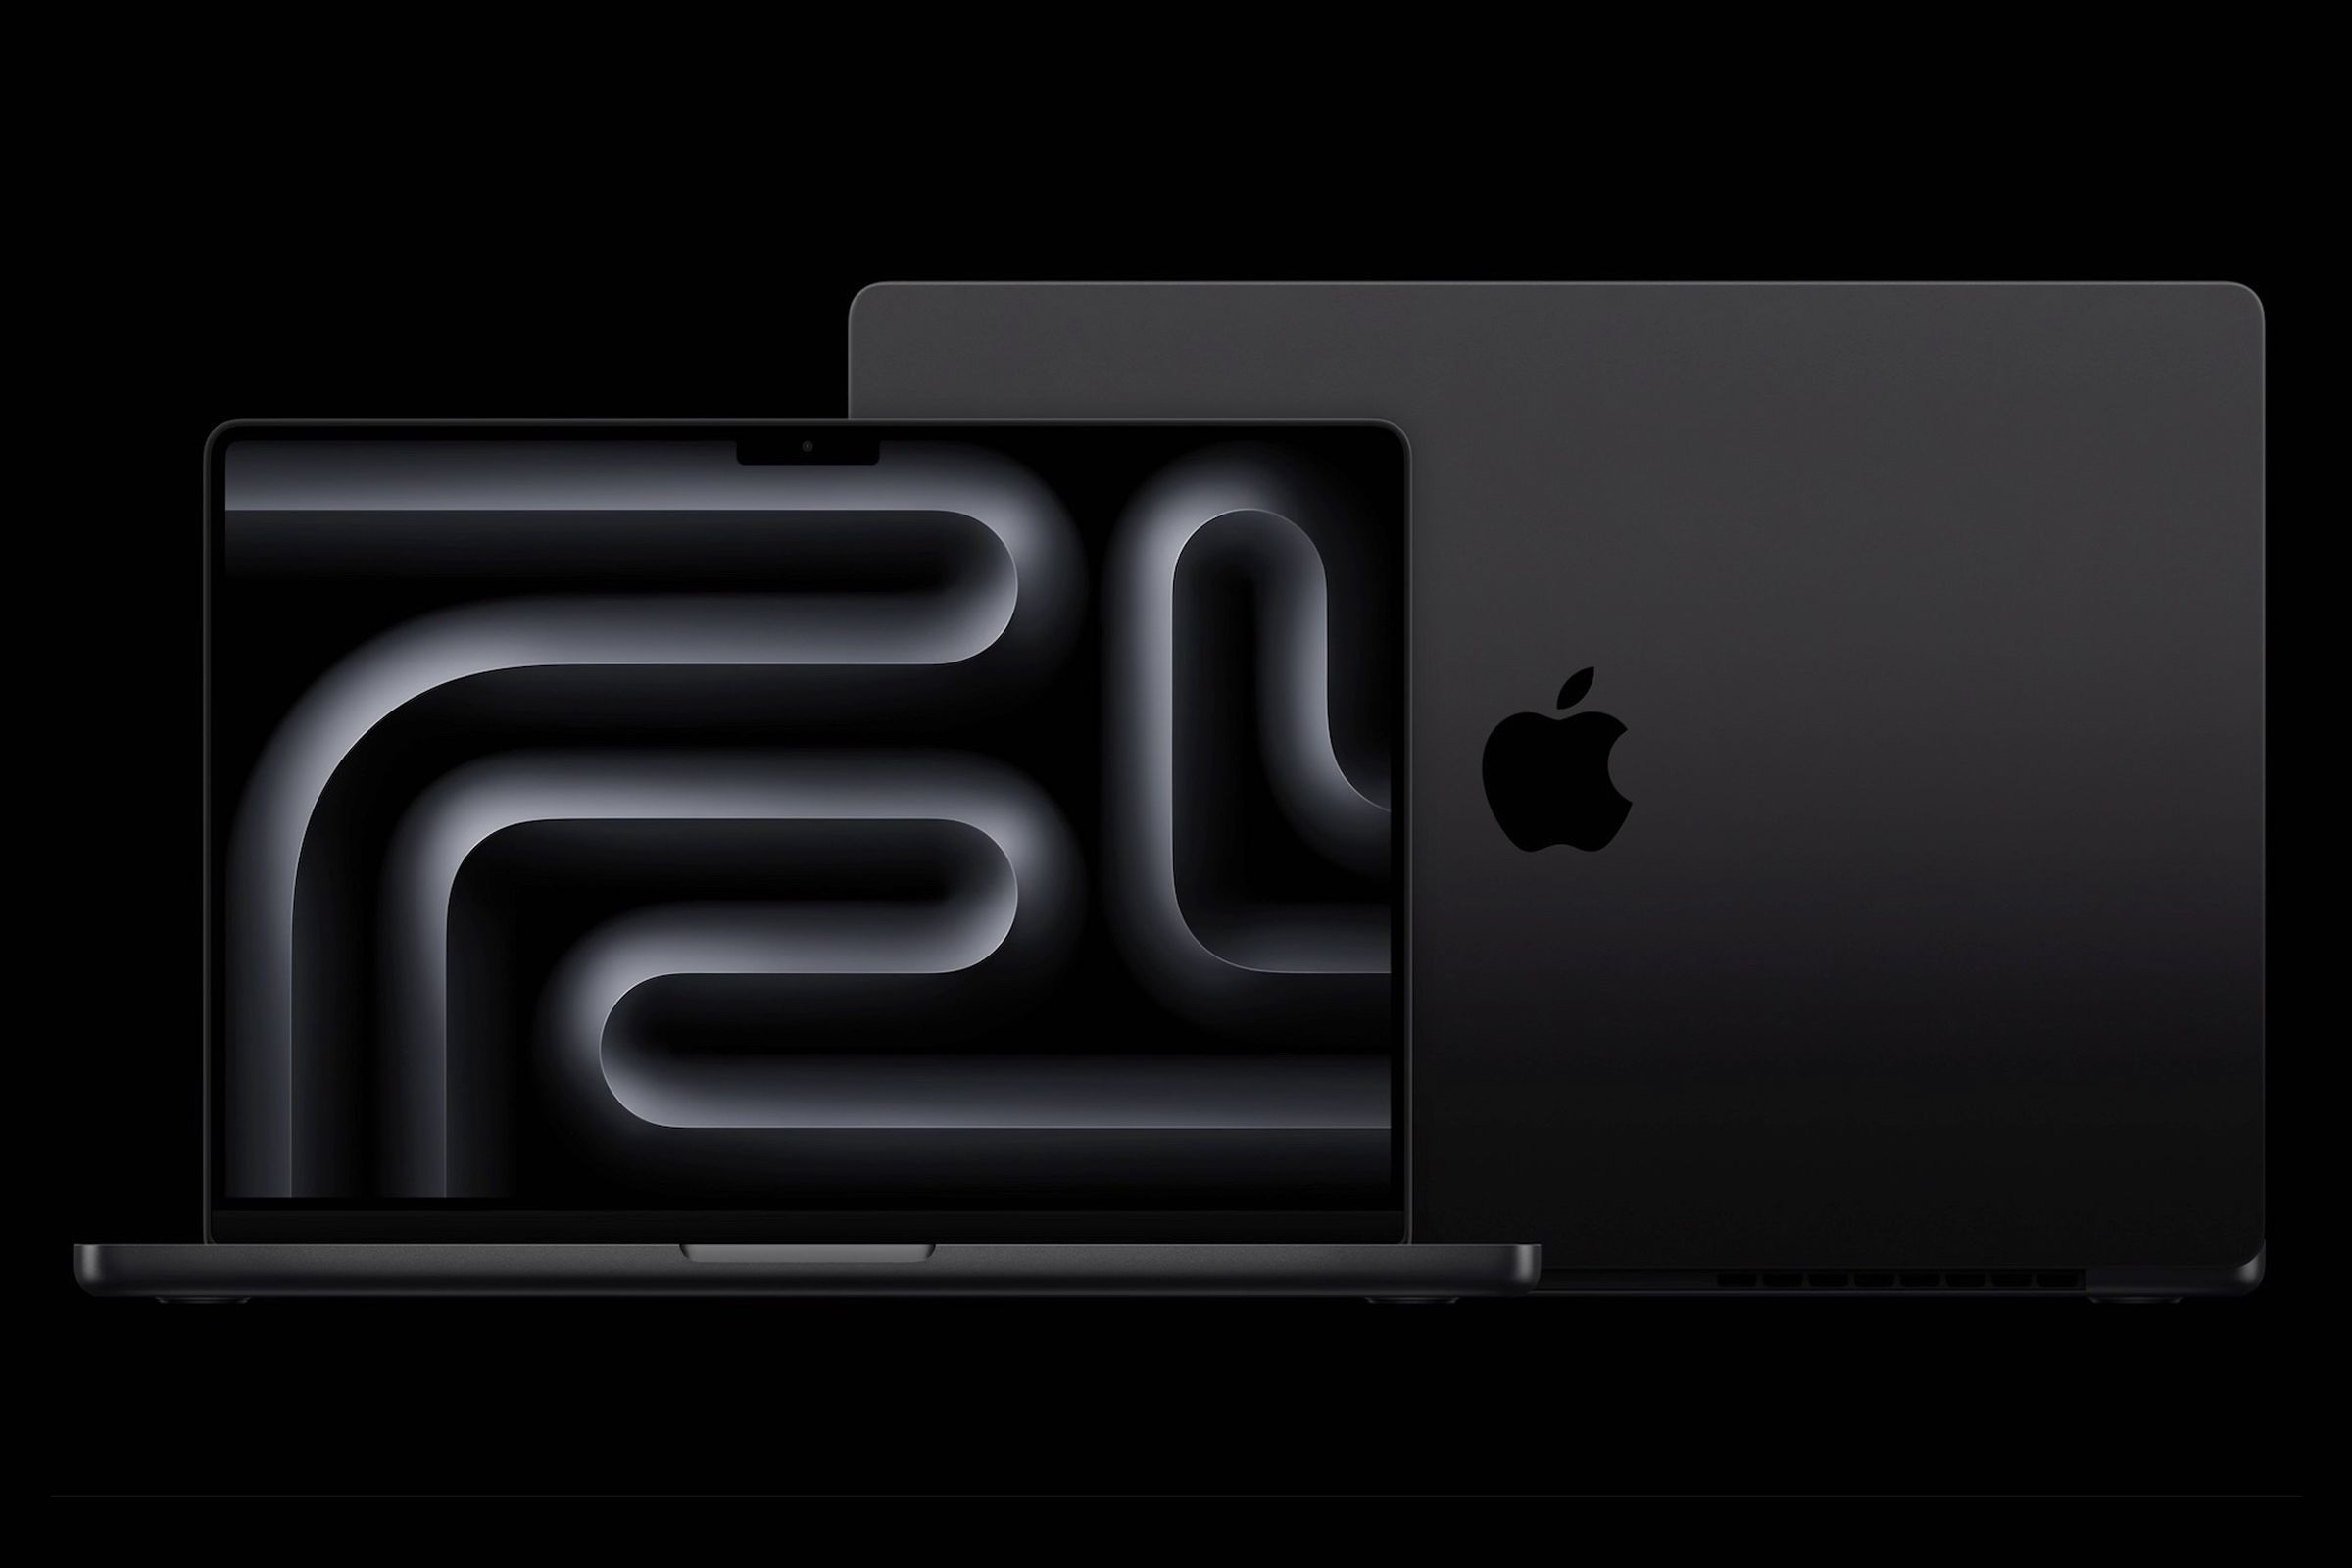 A marketing image of Apple’s MacBook Pro with the new space black finish.